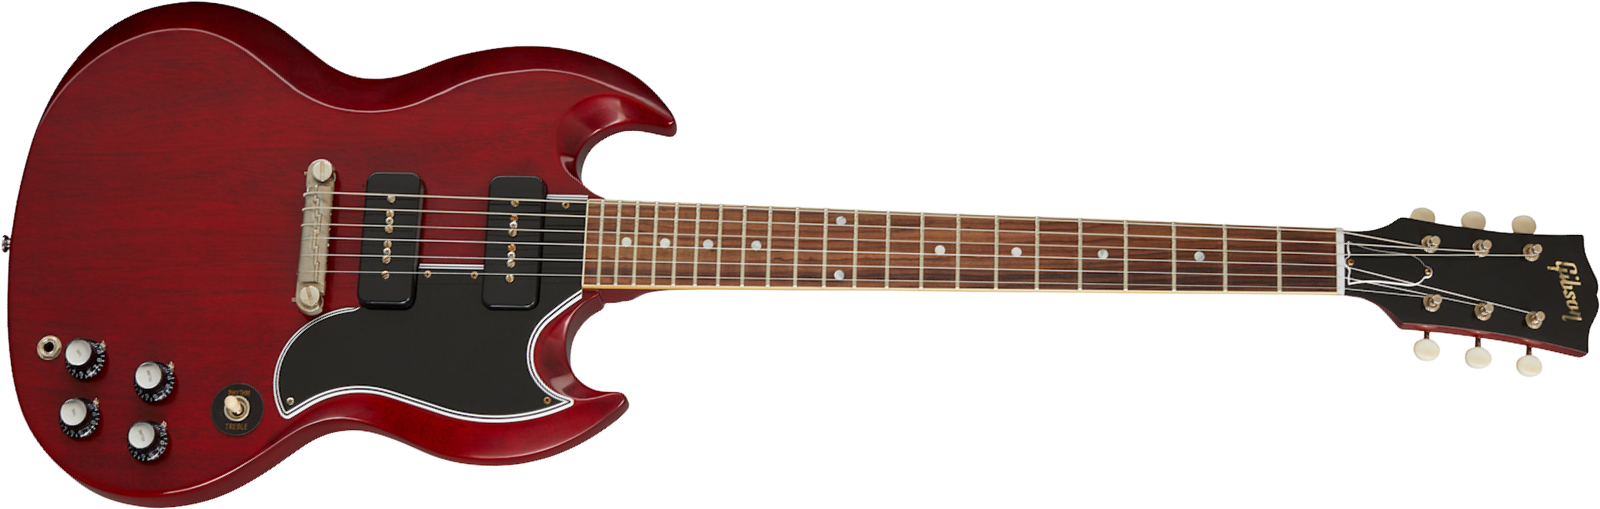 Gibson Custom Shop 1963 SG Special Reissue 2020 - vos cherry red